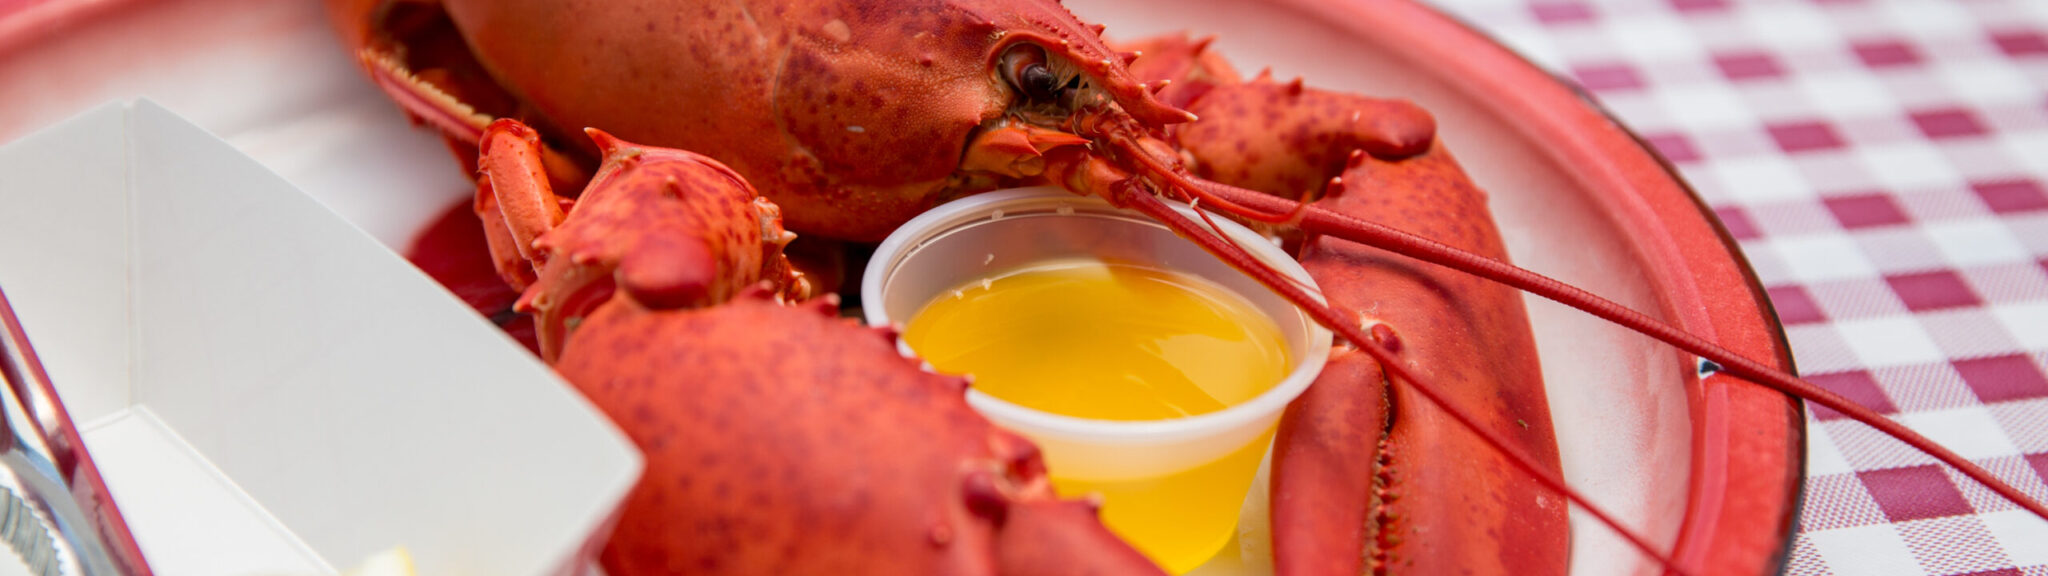 The Inside Scoop: Answers to FAQs About Maine Lobster recipe image